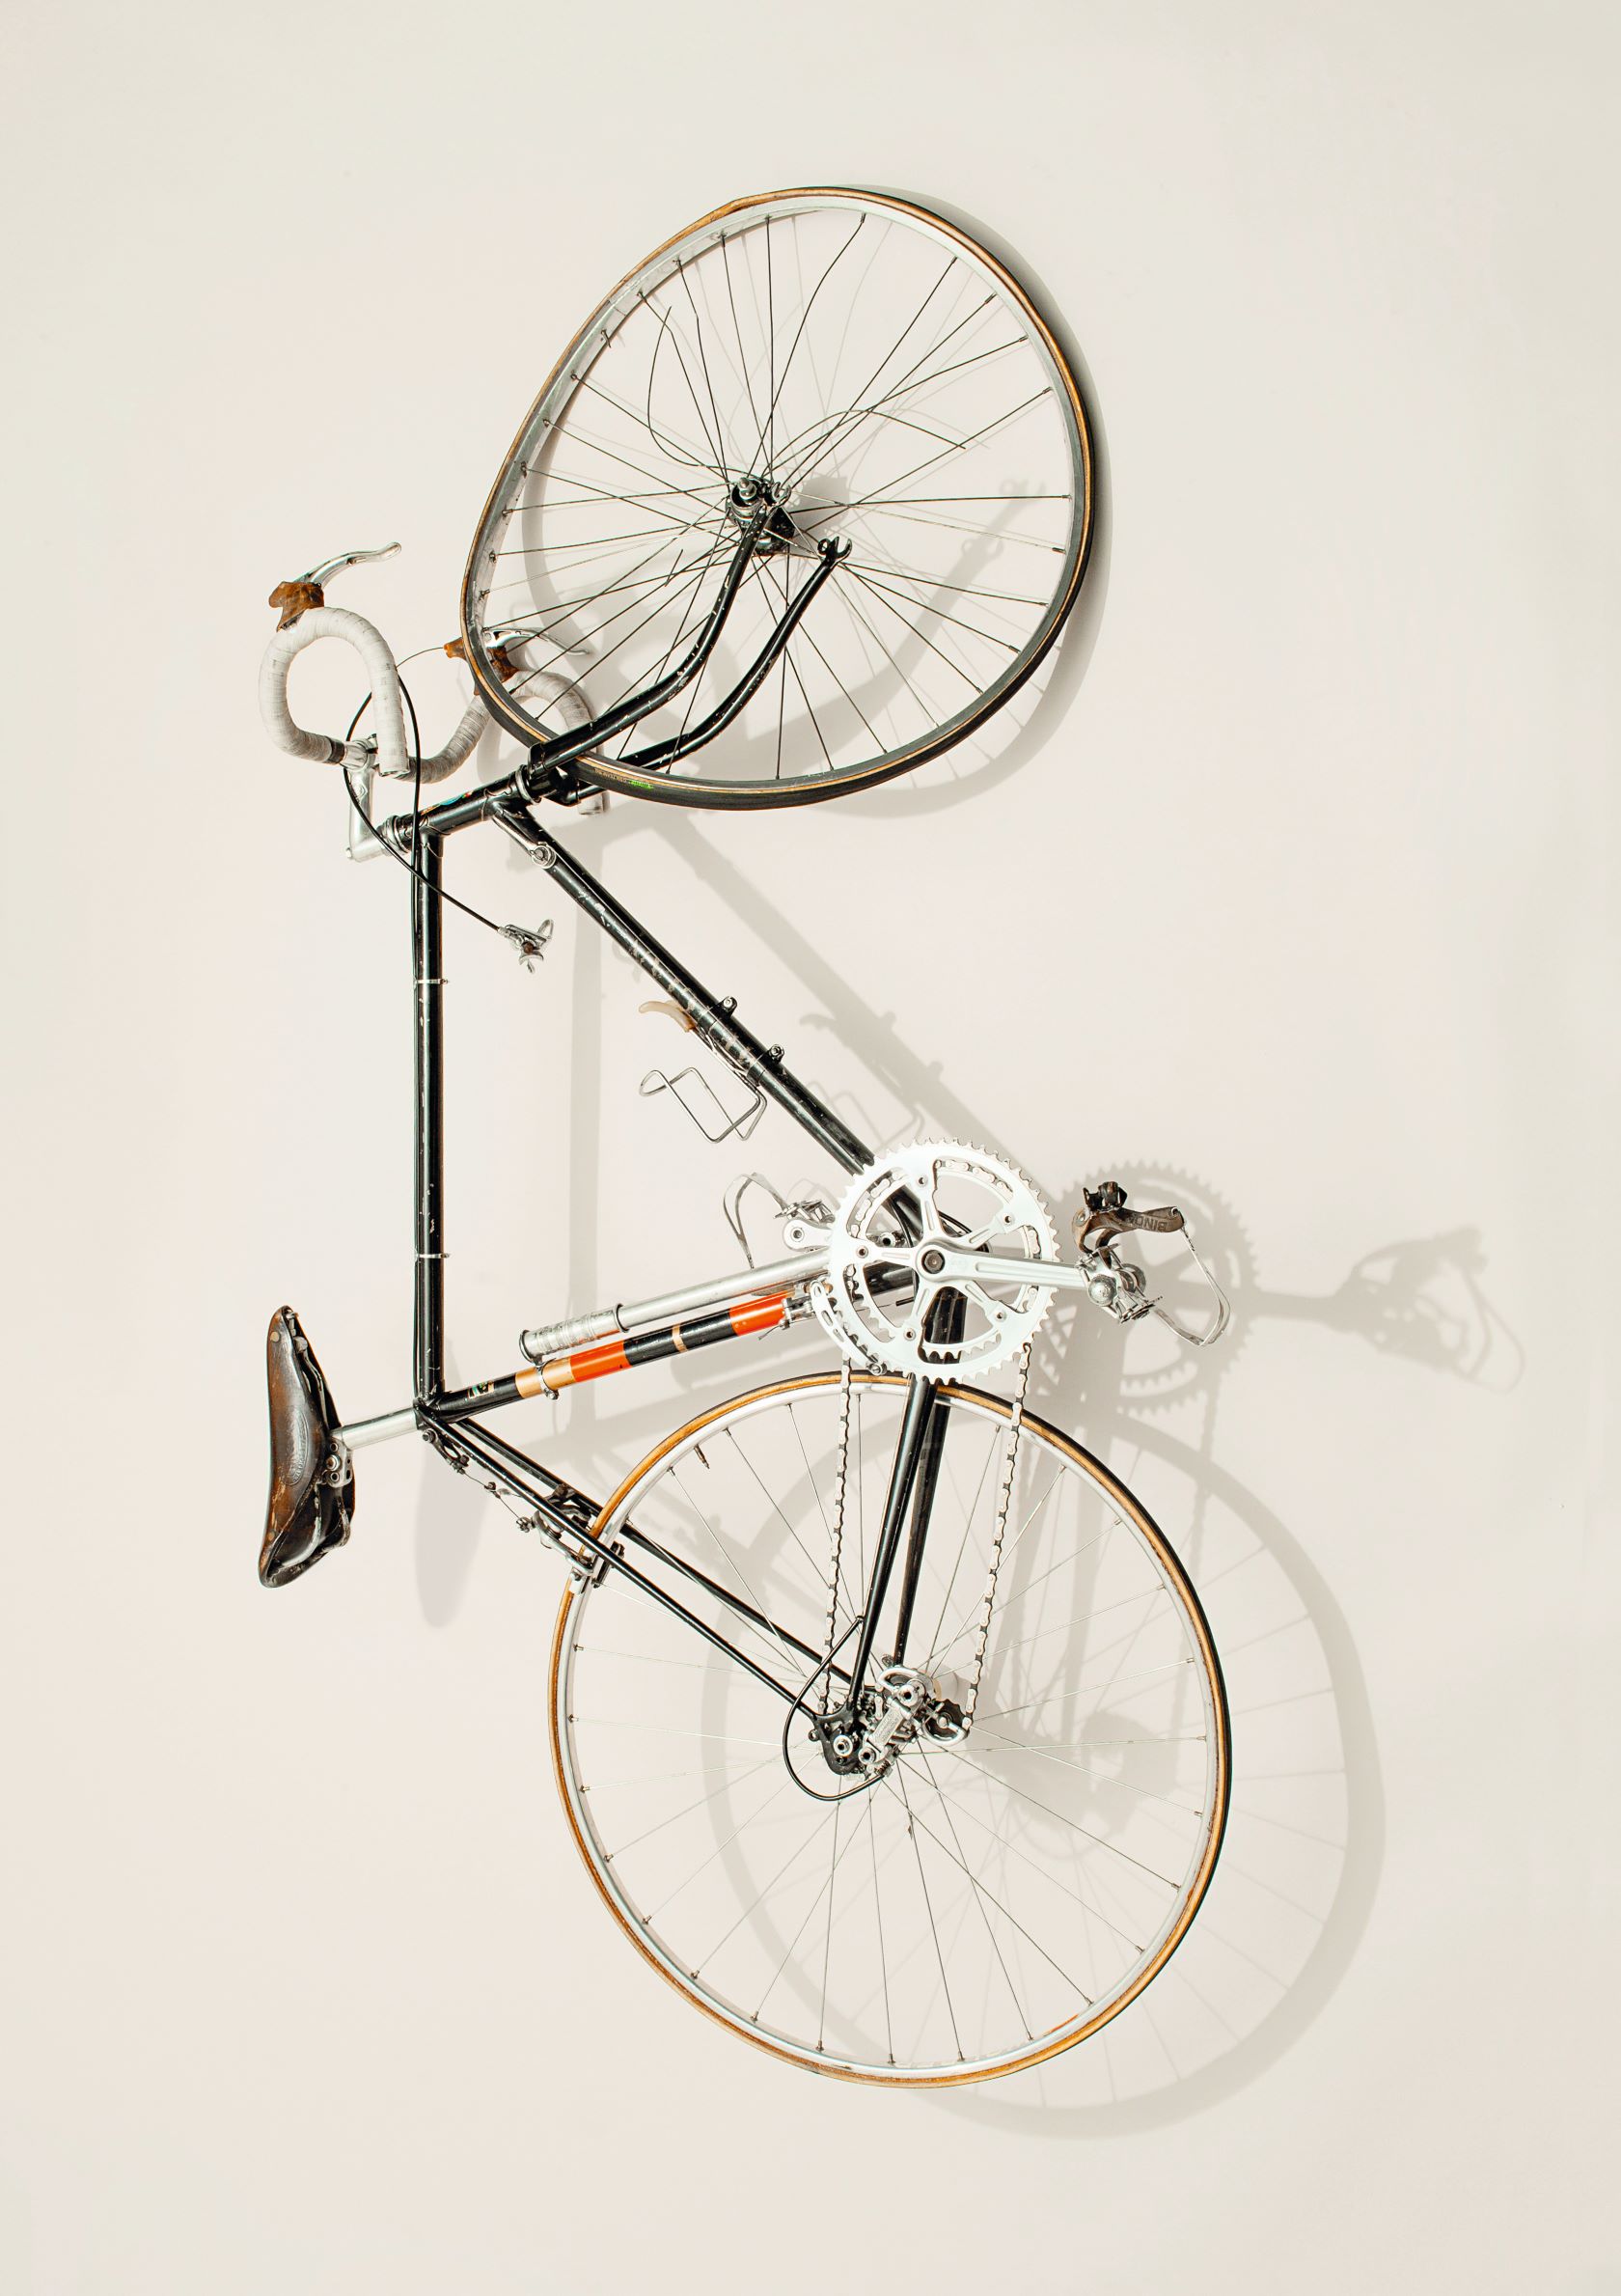 Crashed bicycle. Photo by Matthew Donaldson. From Paul Smith